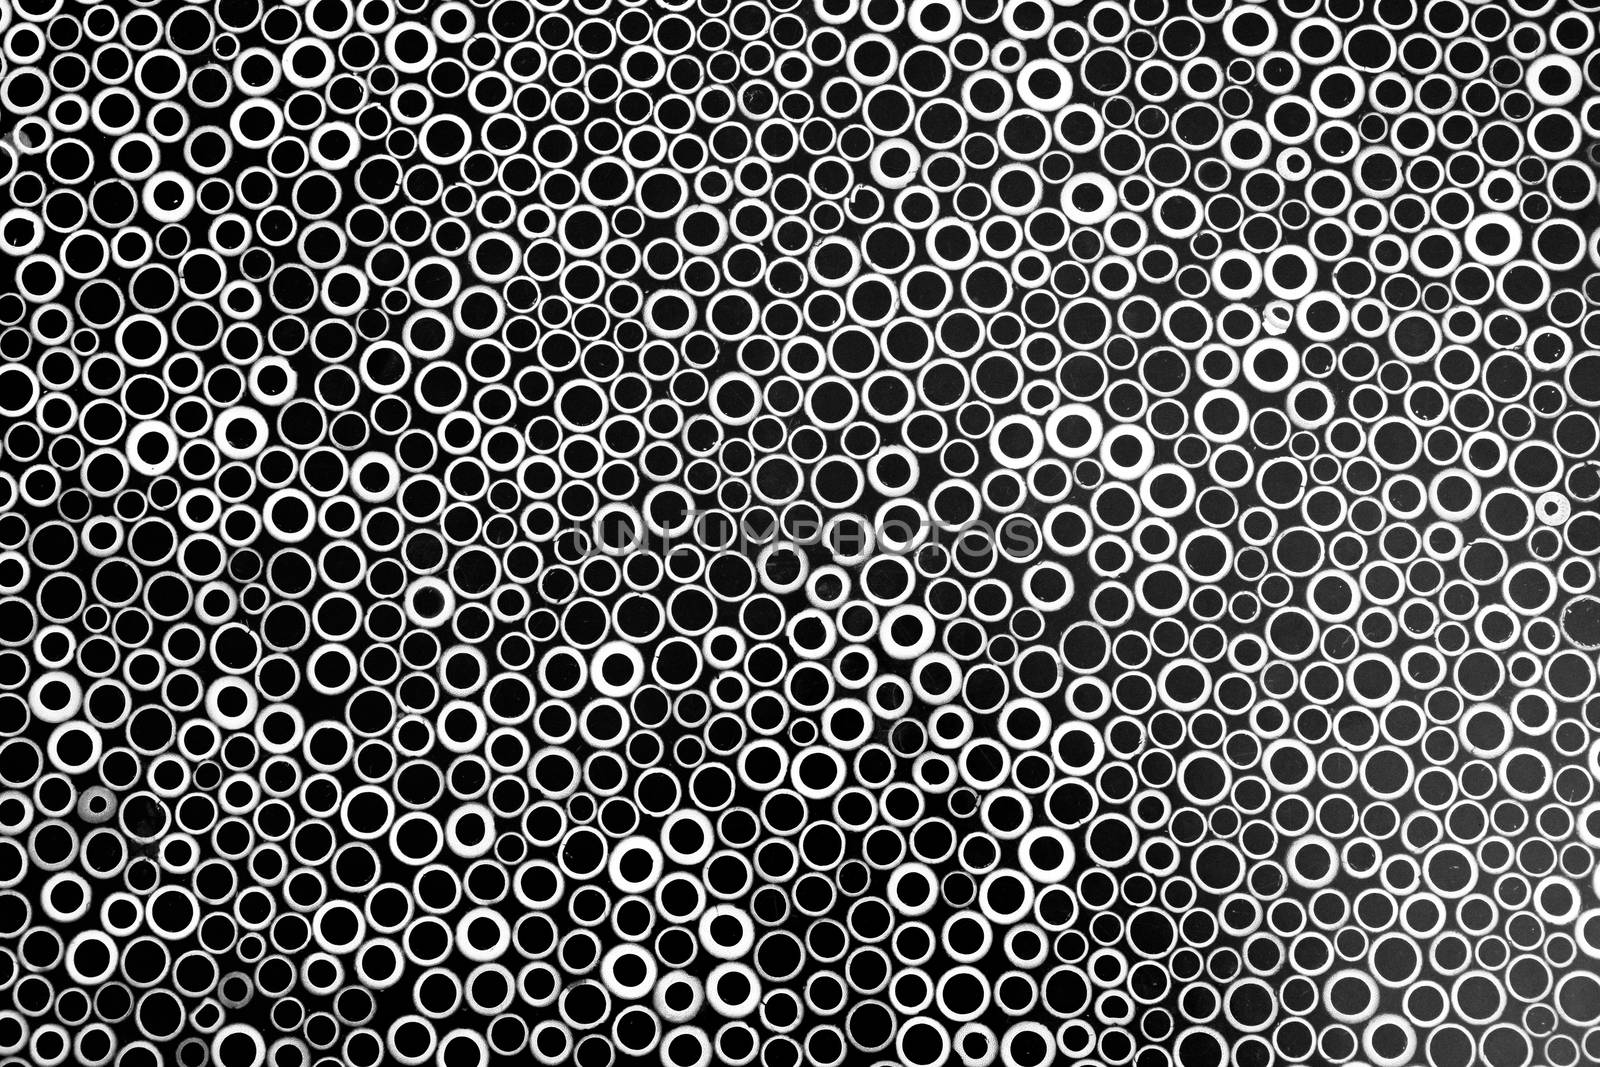 Abstract Black and white background bamoo circles by Suriyaphoto